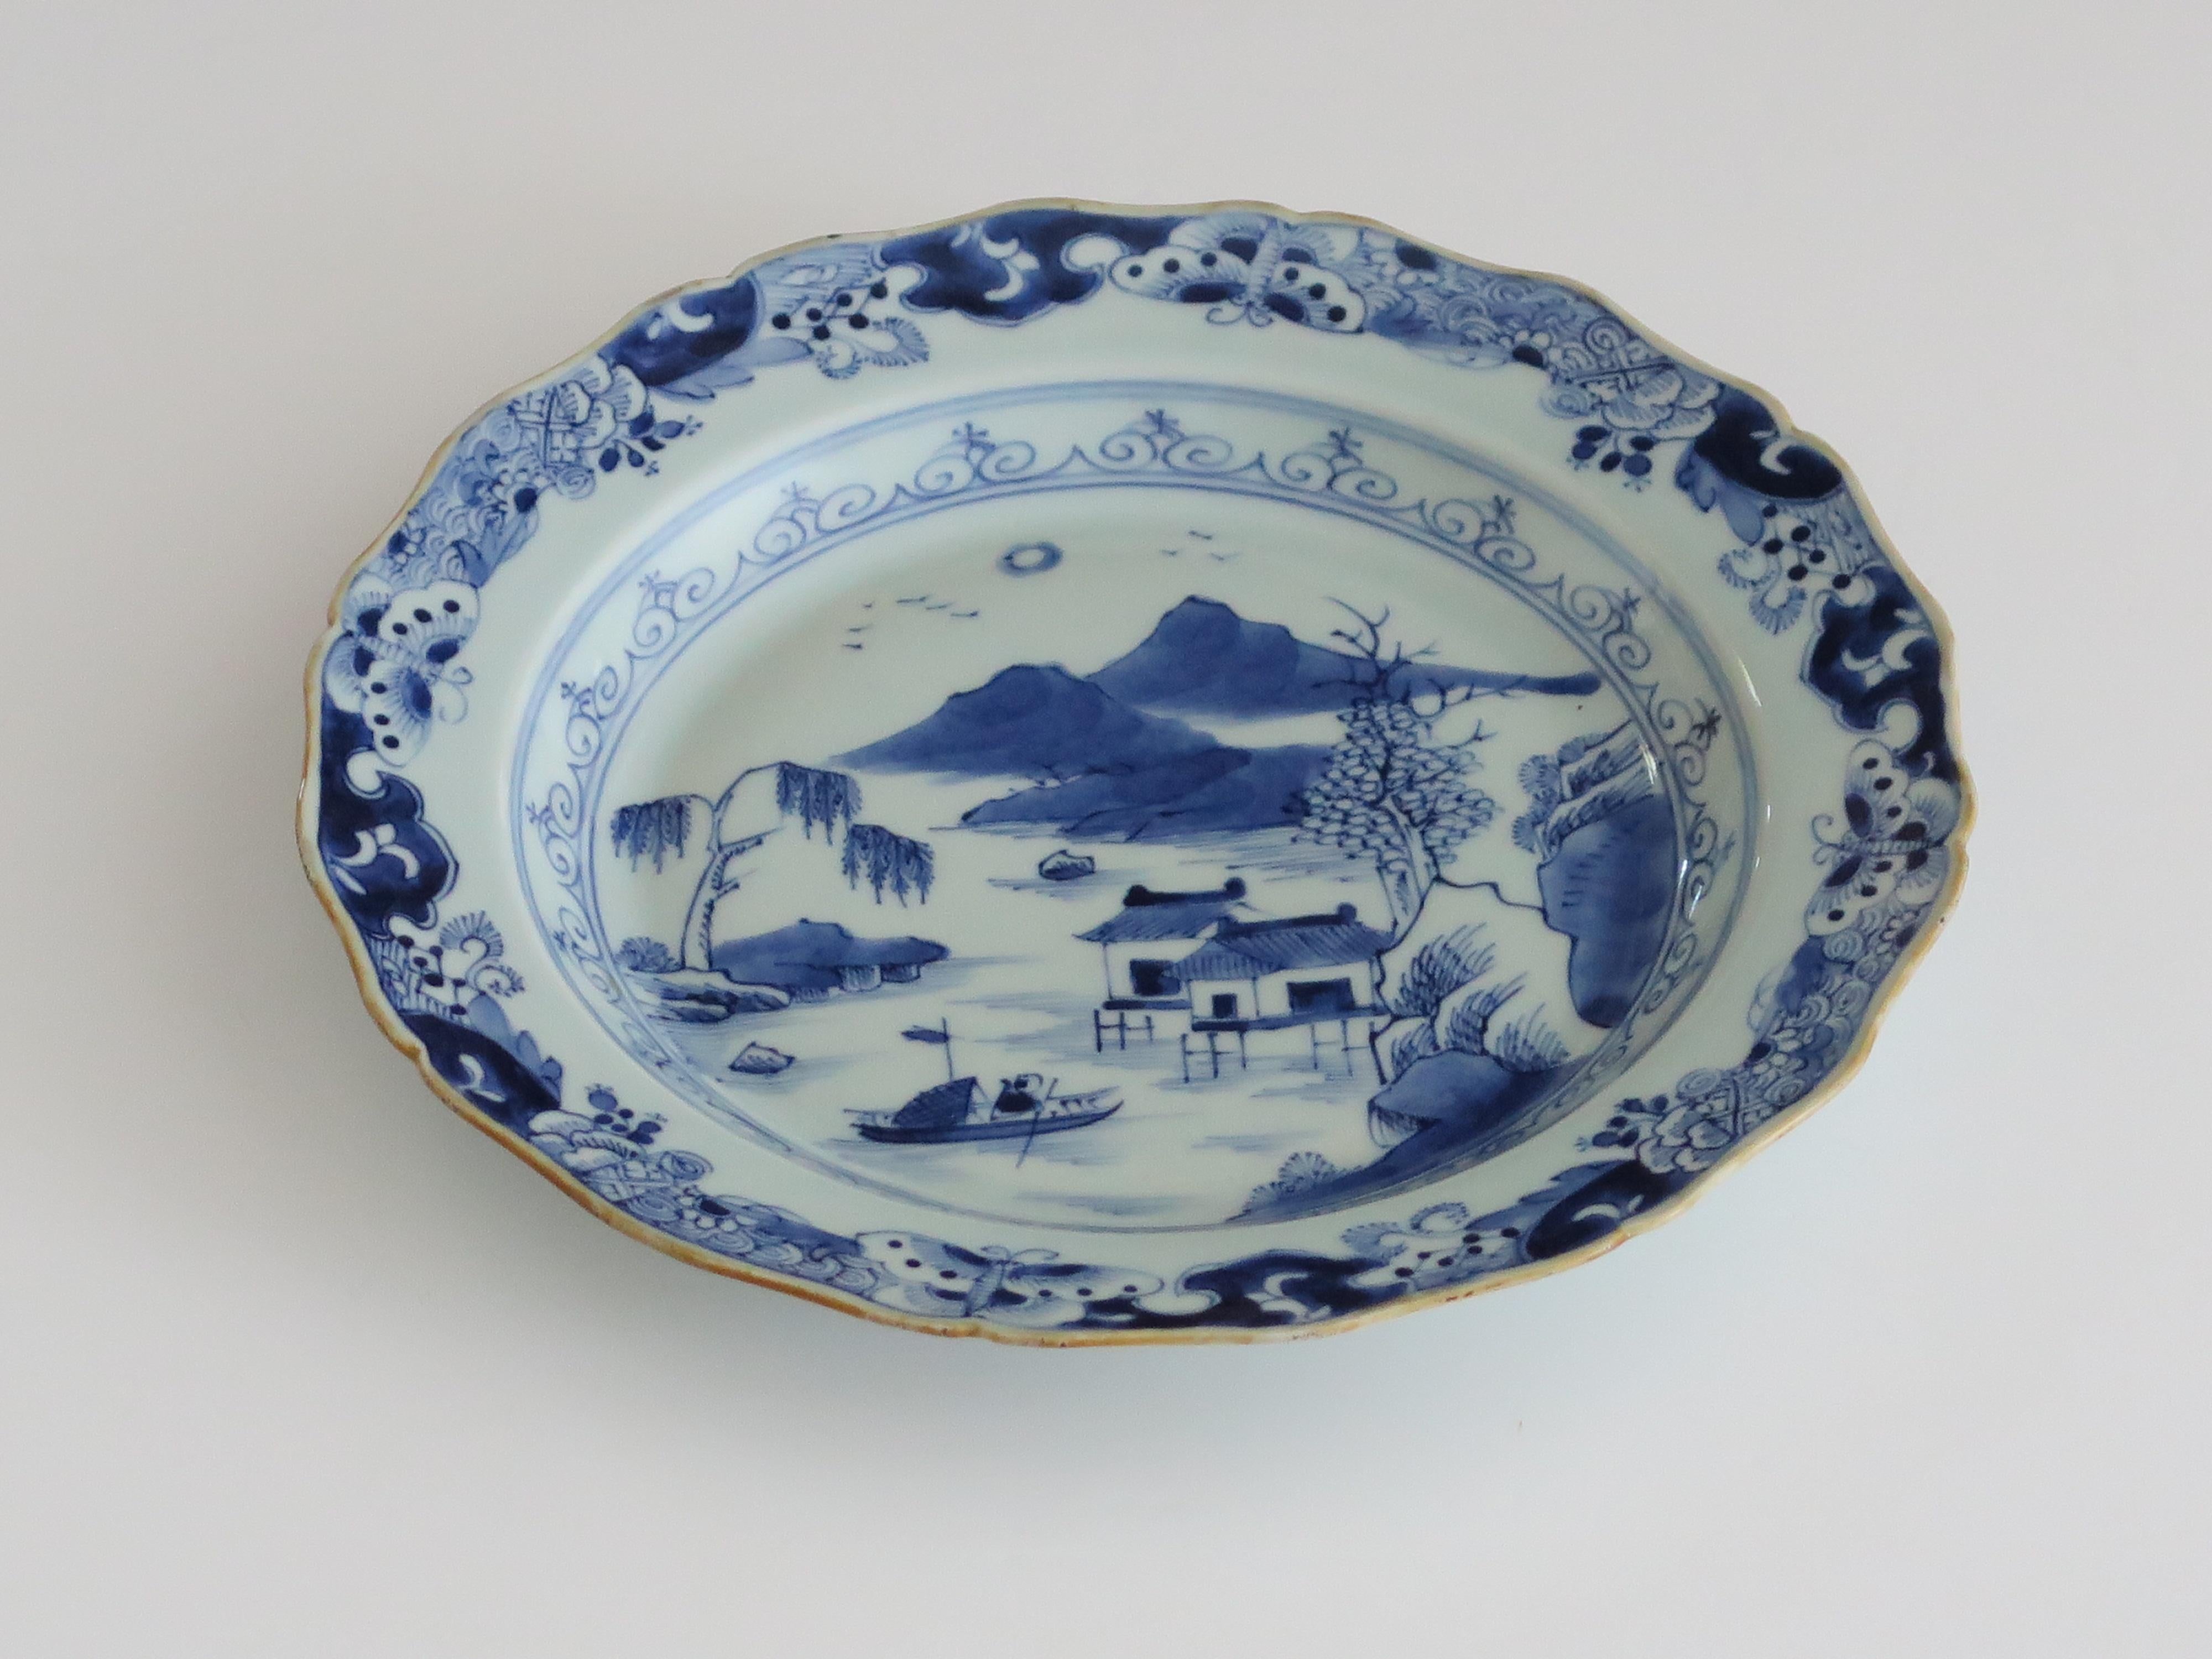 Hand-Painted Chinese Export Porcelain Plate Blue and White Waterside Scene, Qing, circa 1770